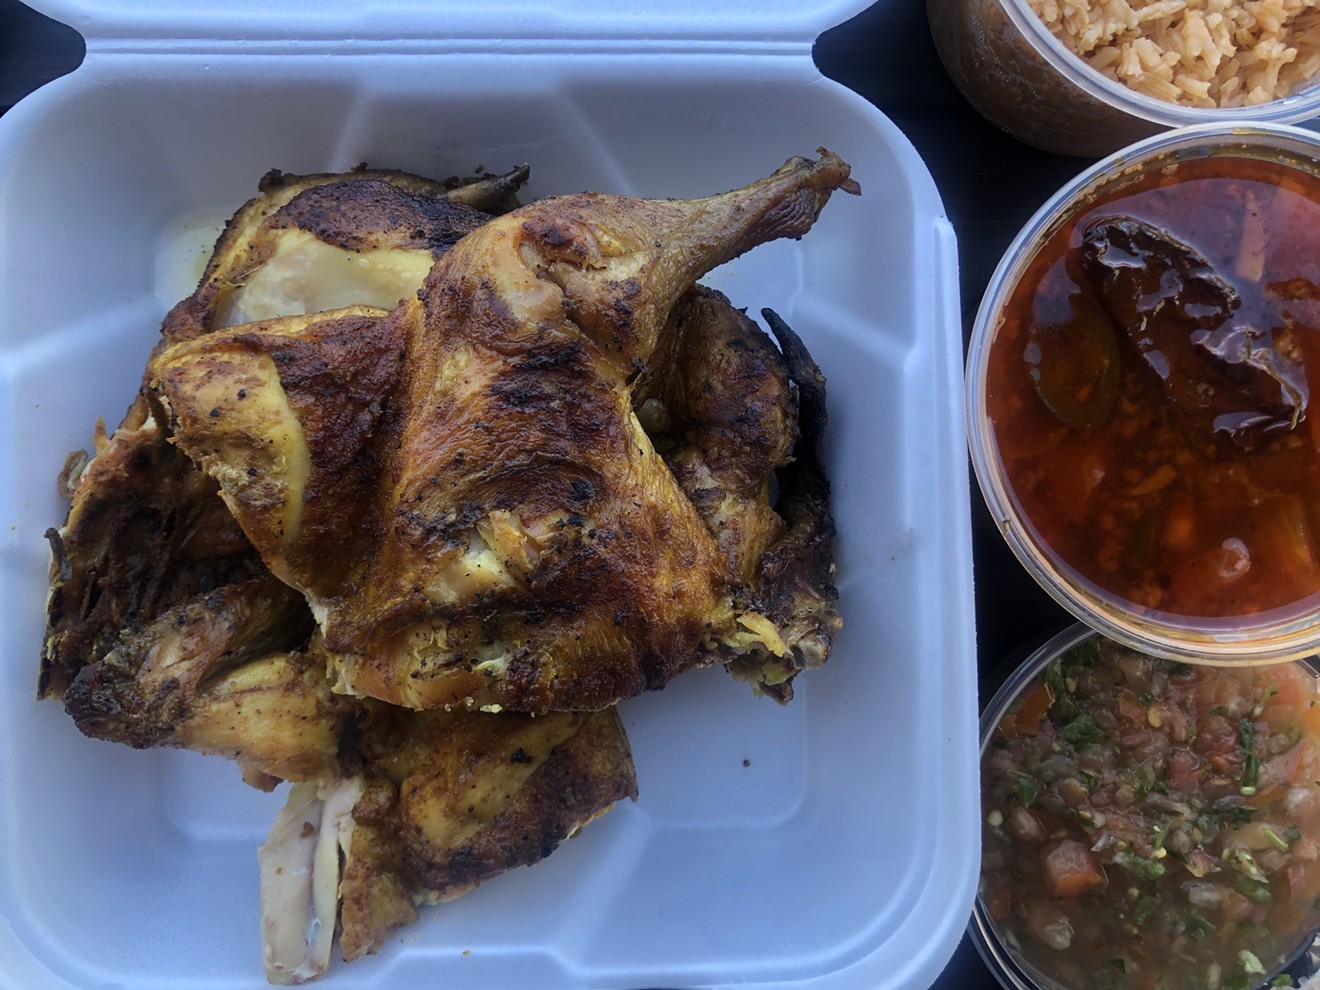 A whole Cuernavaca chicken chopped into parts, plus sides.